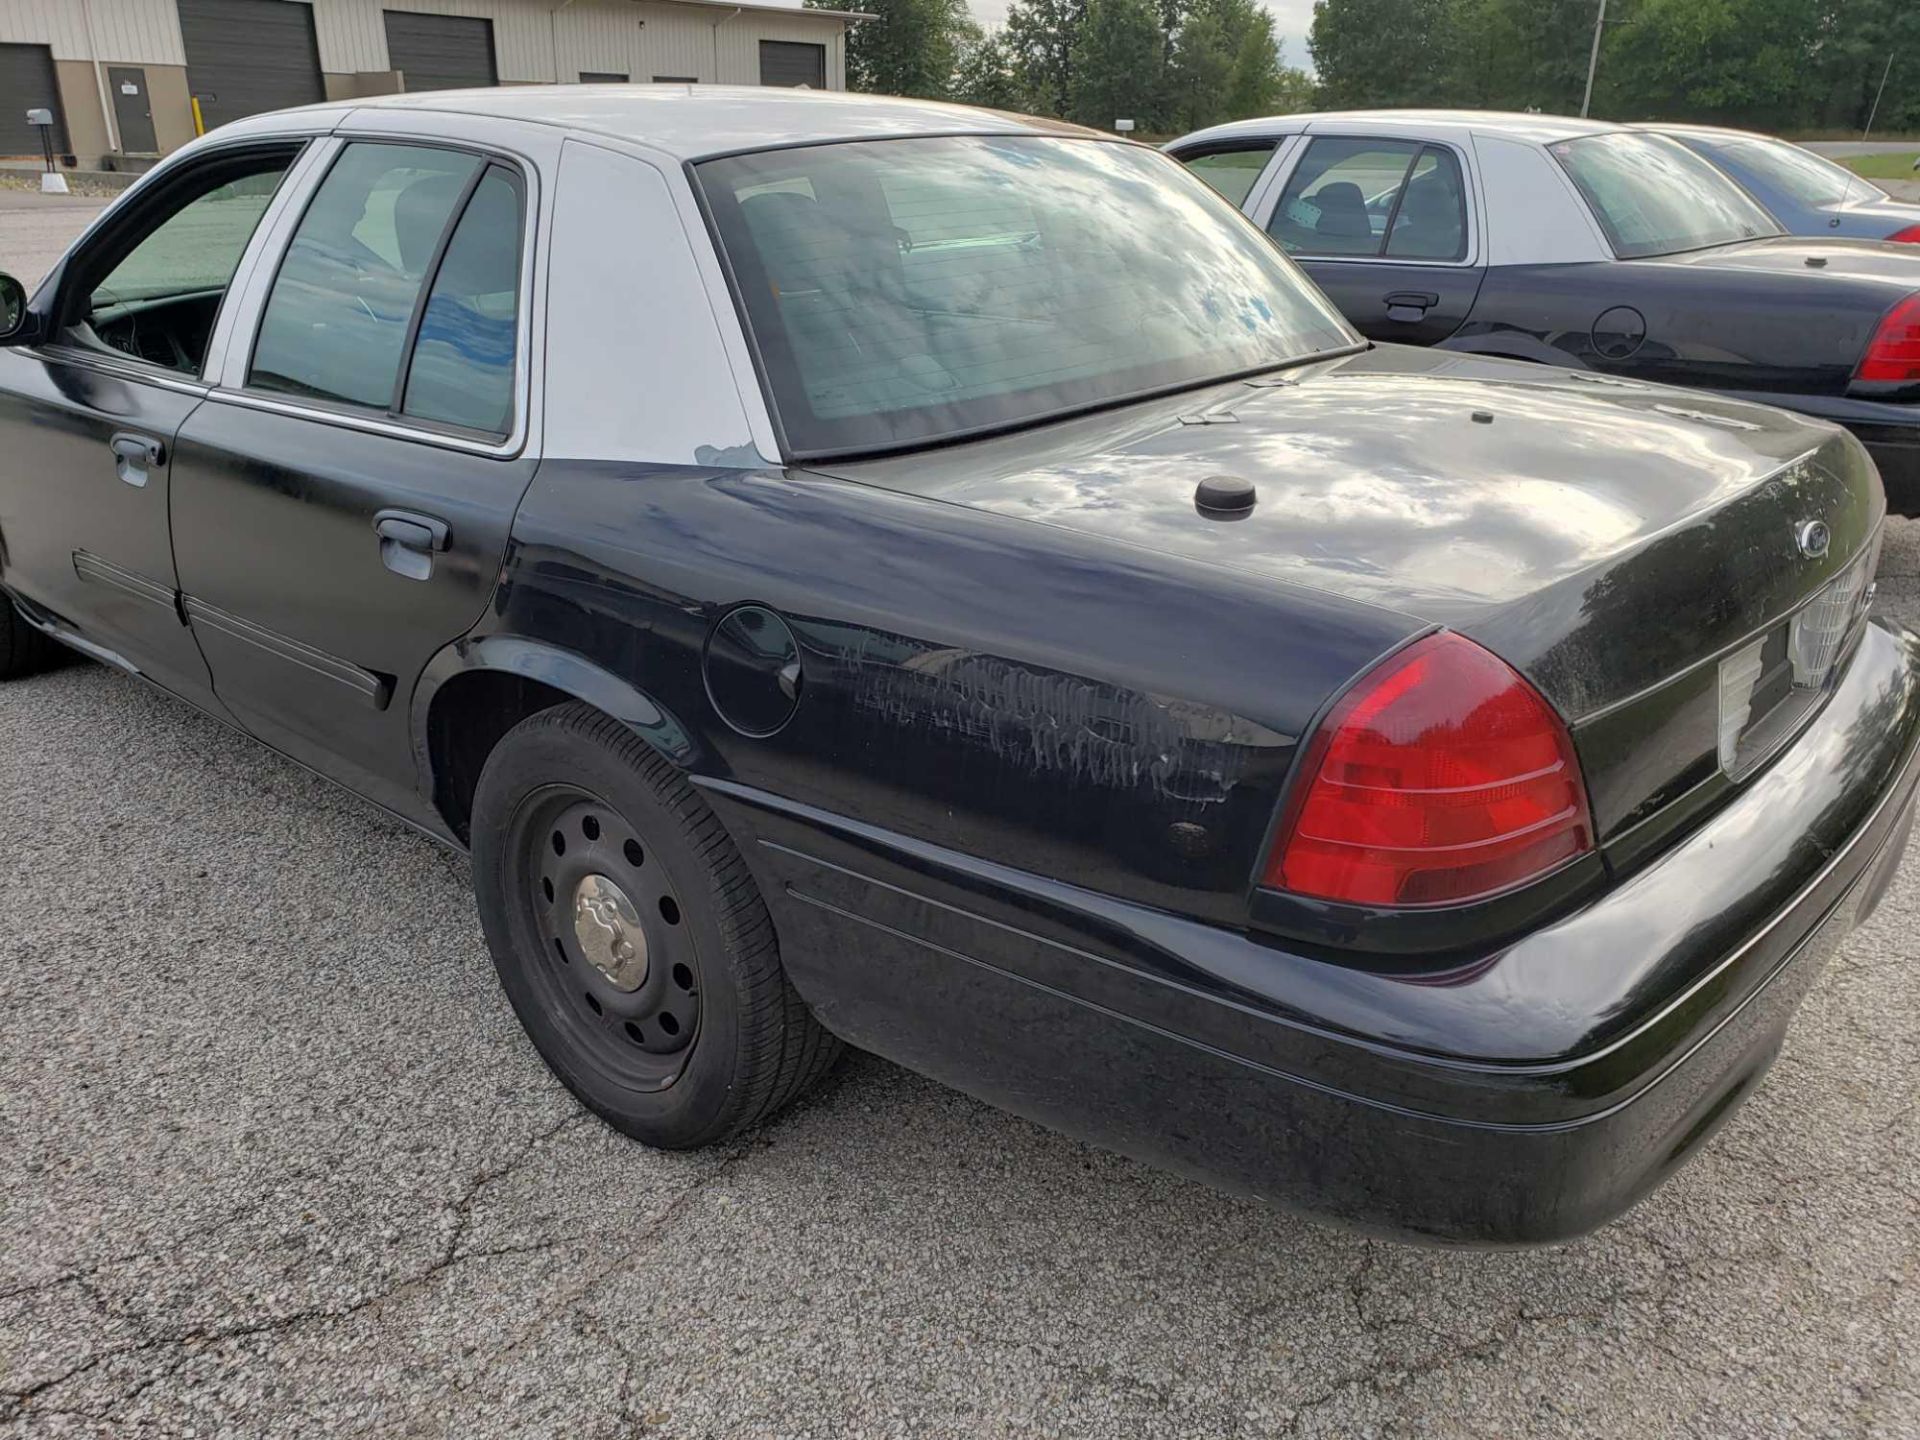 008 Ford Crown Victoria. VIN 2FAHP71V09X112075. Police Interceptor. 123,233 miles showing. - Image 2 of 19